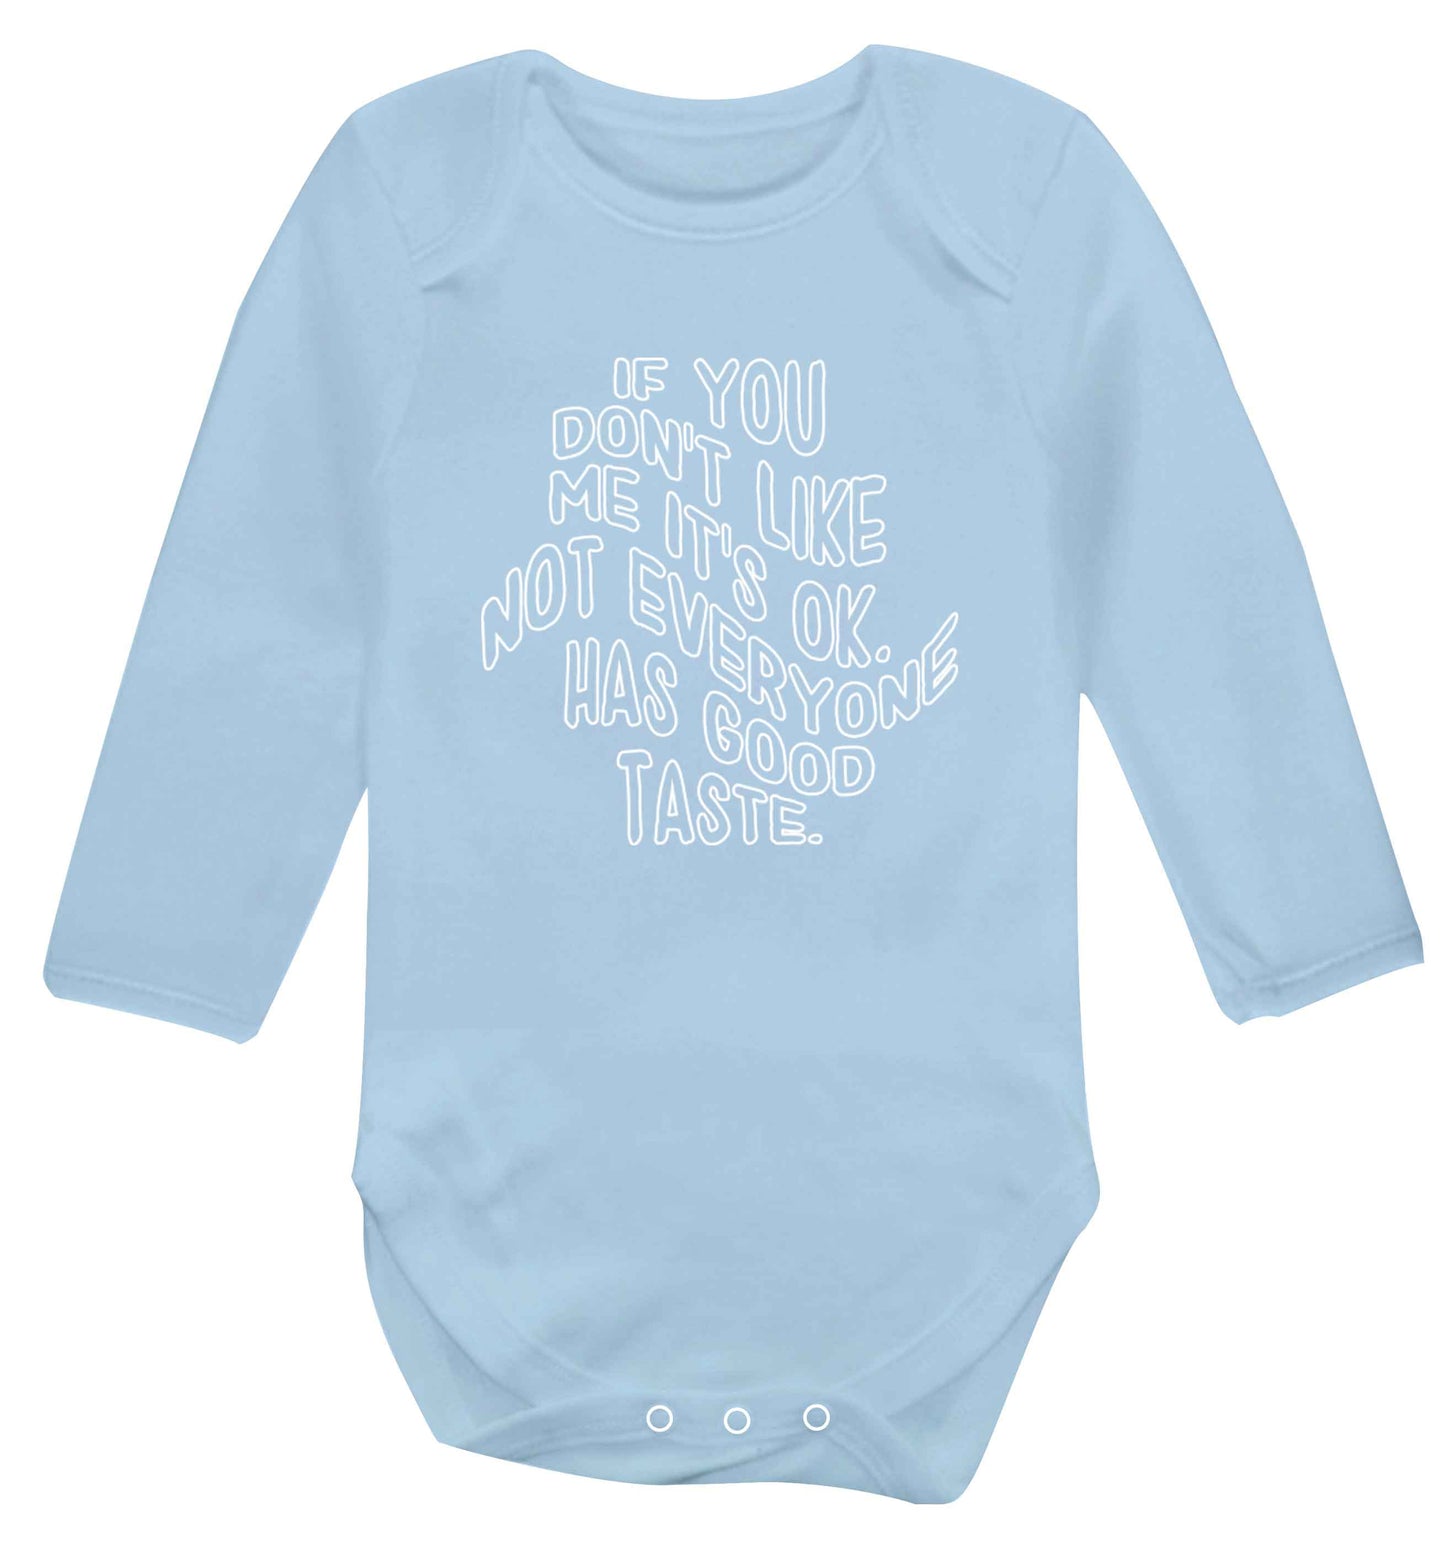 If you don't like me it's ok not everyone has good taste baby vest long sleeved pale blue 6-12 months